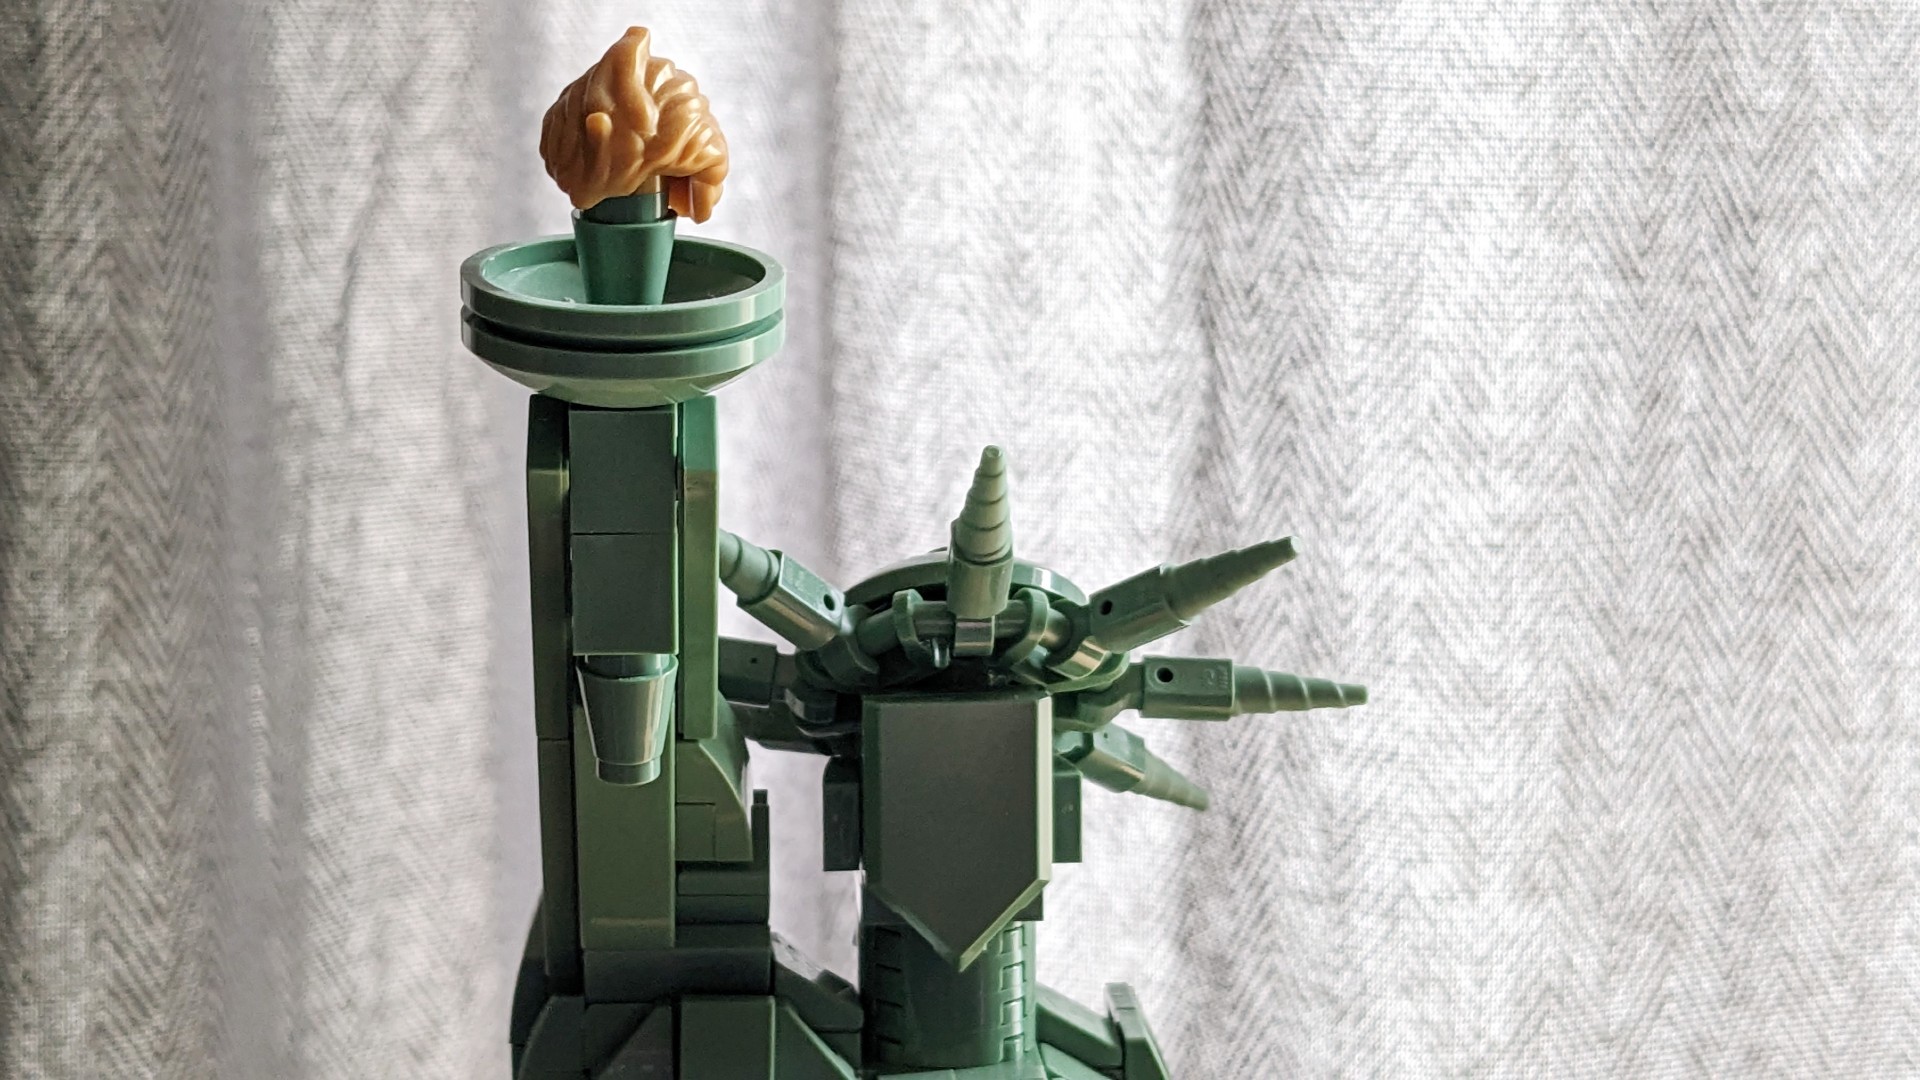 Lego Architecture Statue of Liberty 21042 - close up of head and golden torch.